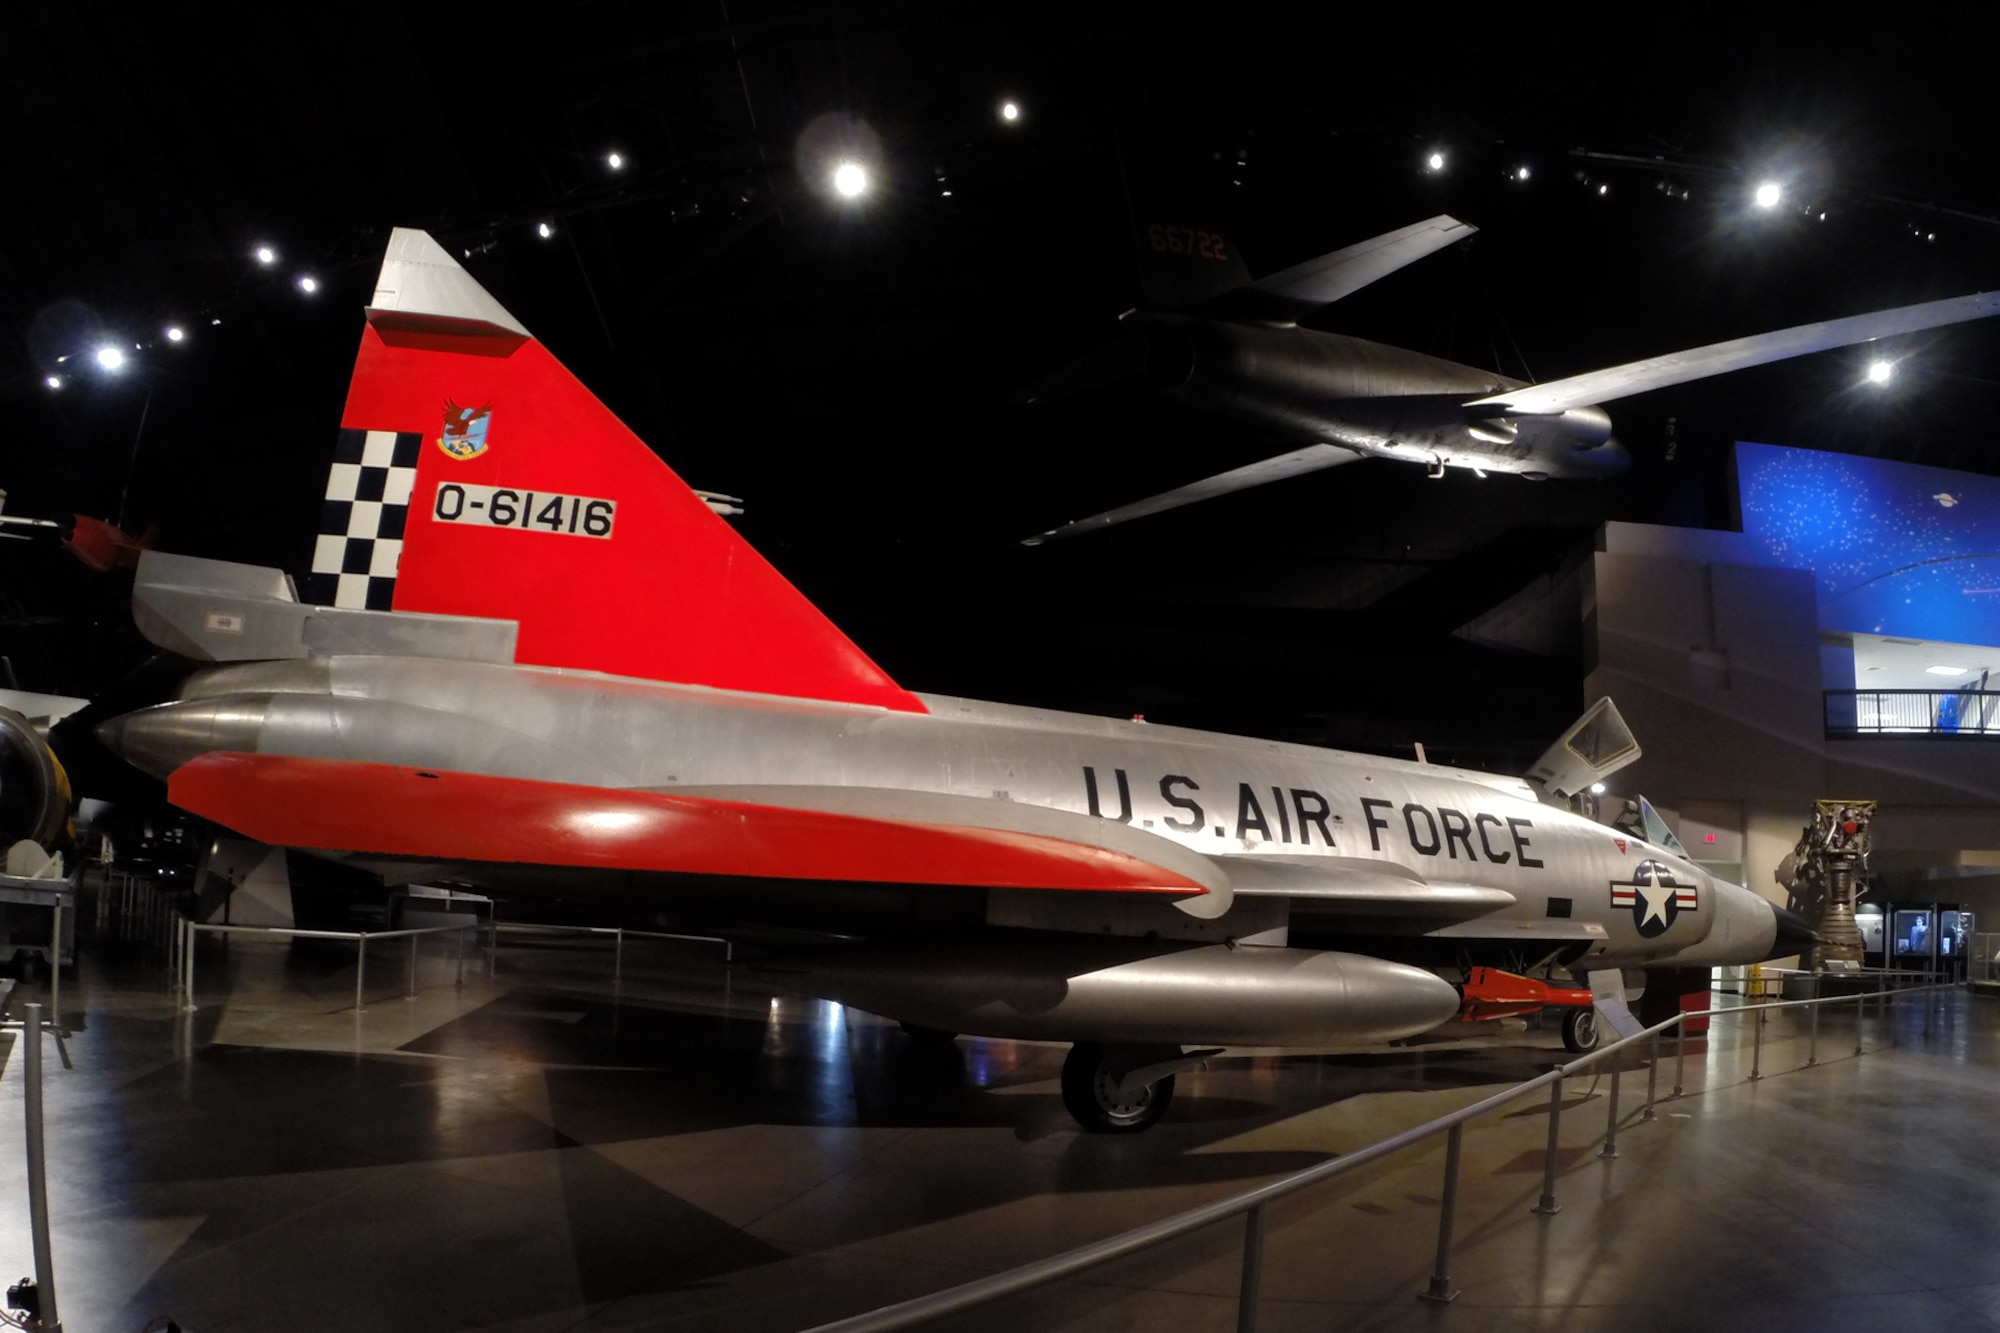 Convair F-102A Delta Dagger in the Cold War Gallery at the National Museum of the United States Air Force (U.S. Air Force photo)